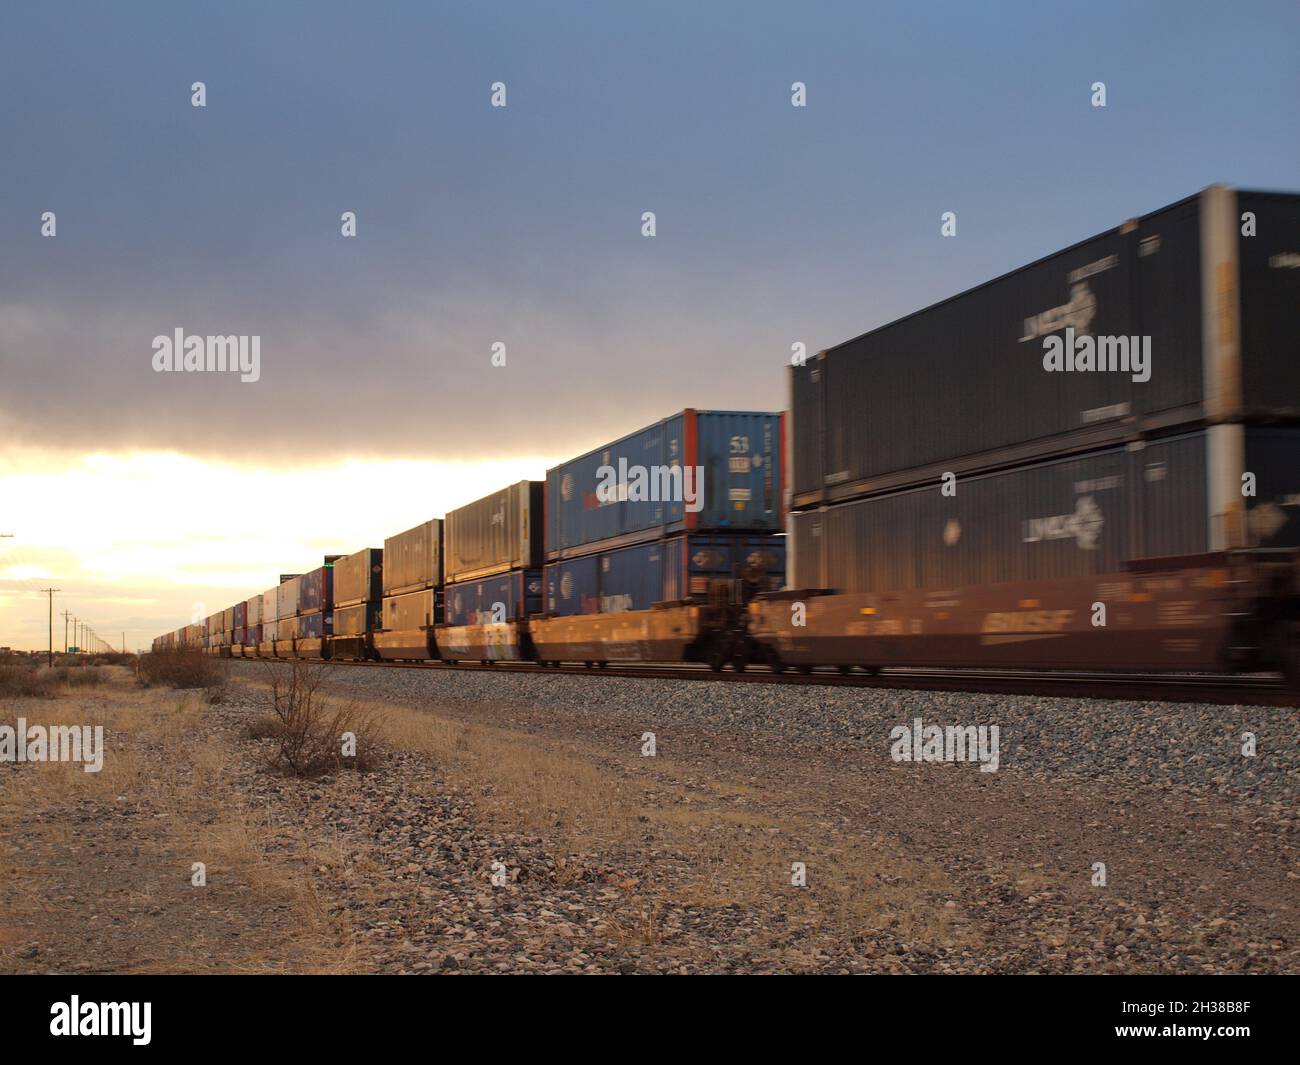 Union Pacific train through the American Southwest at Deming, New Mexico. Both enclosed auto carriers and containers are shown heading west at speed. Stock Photo